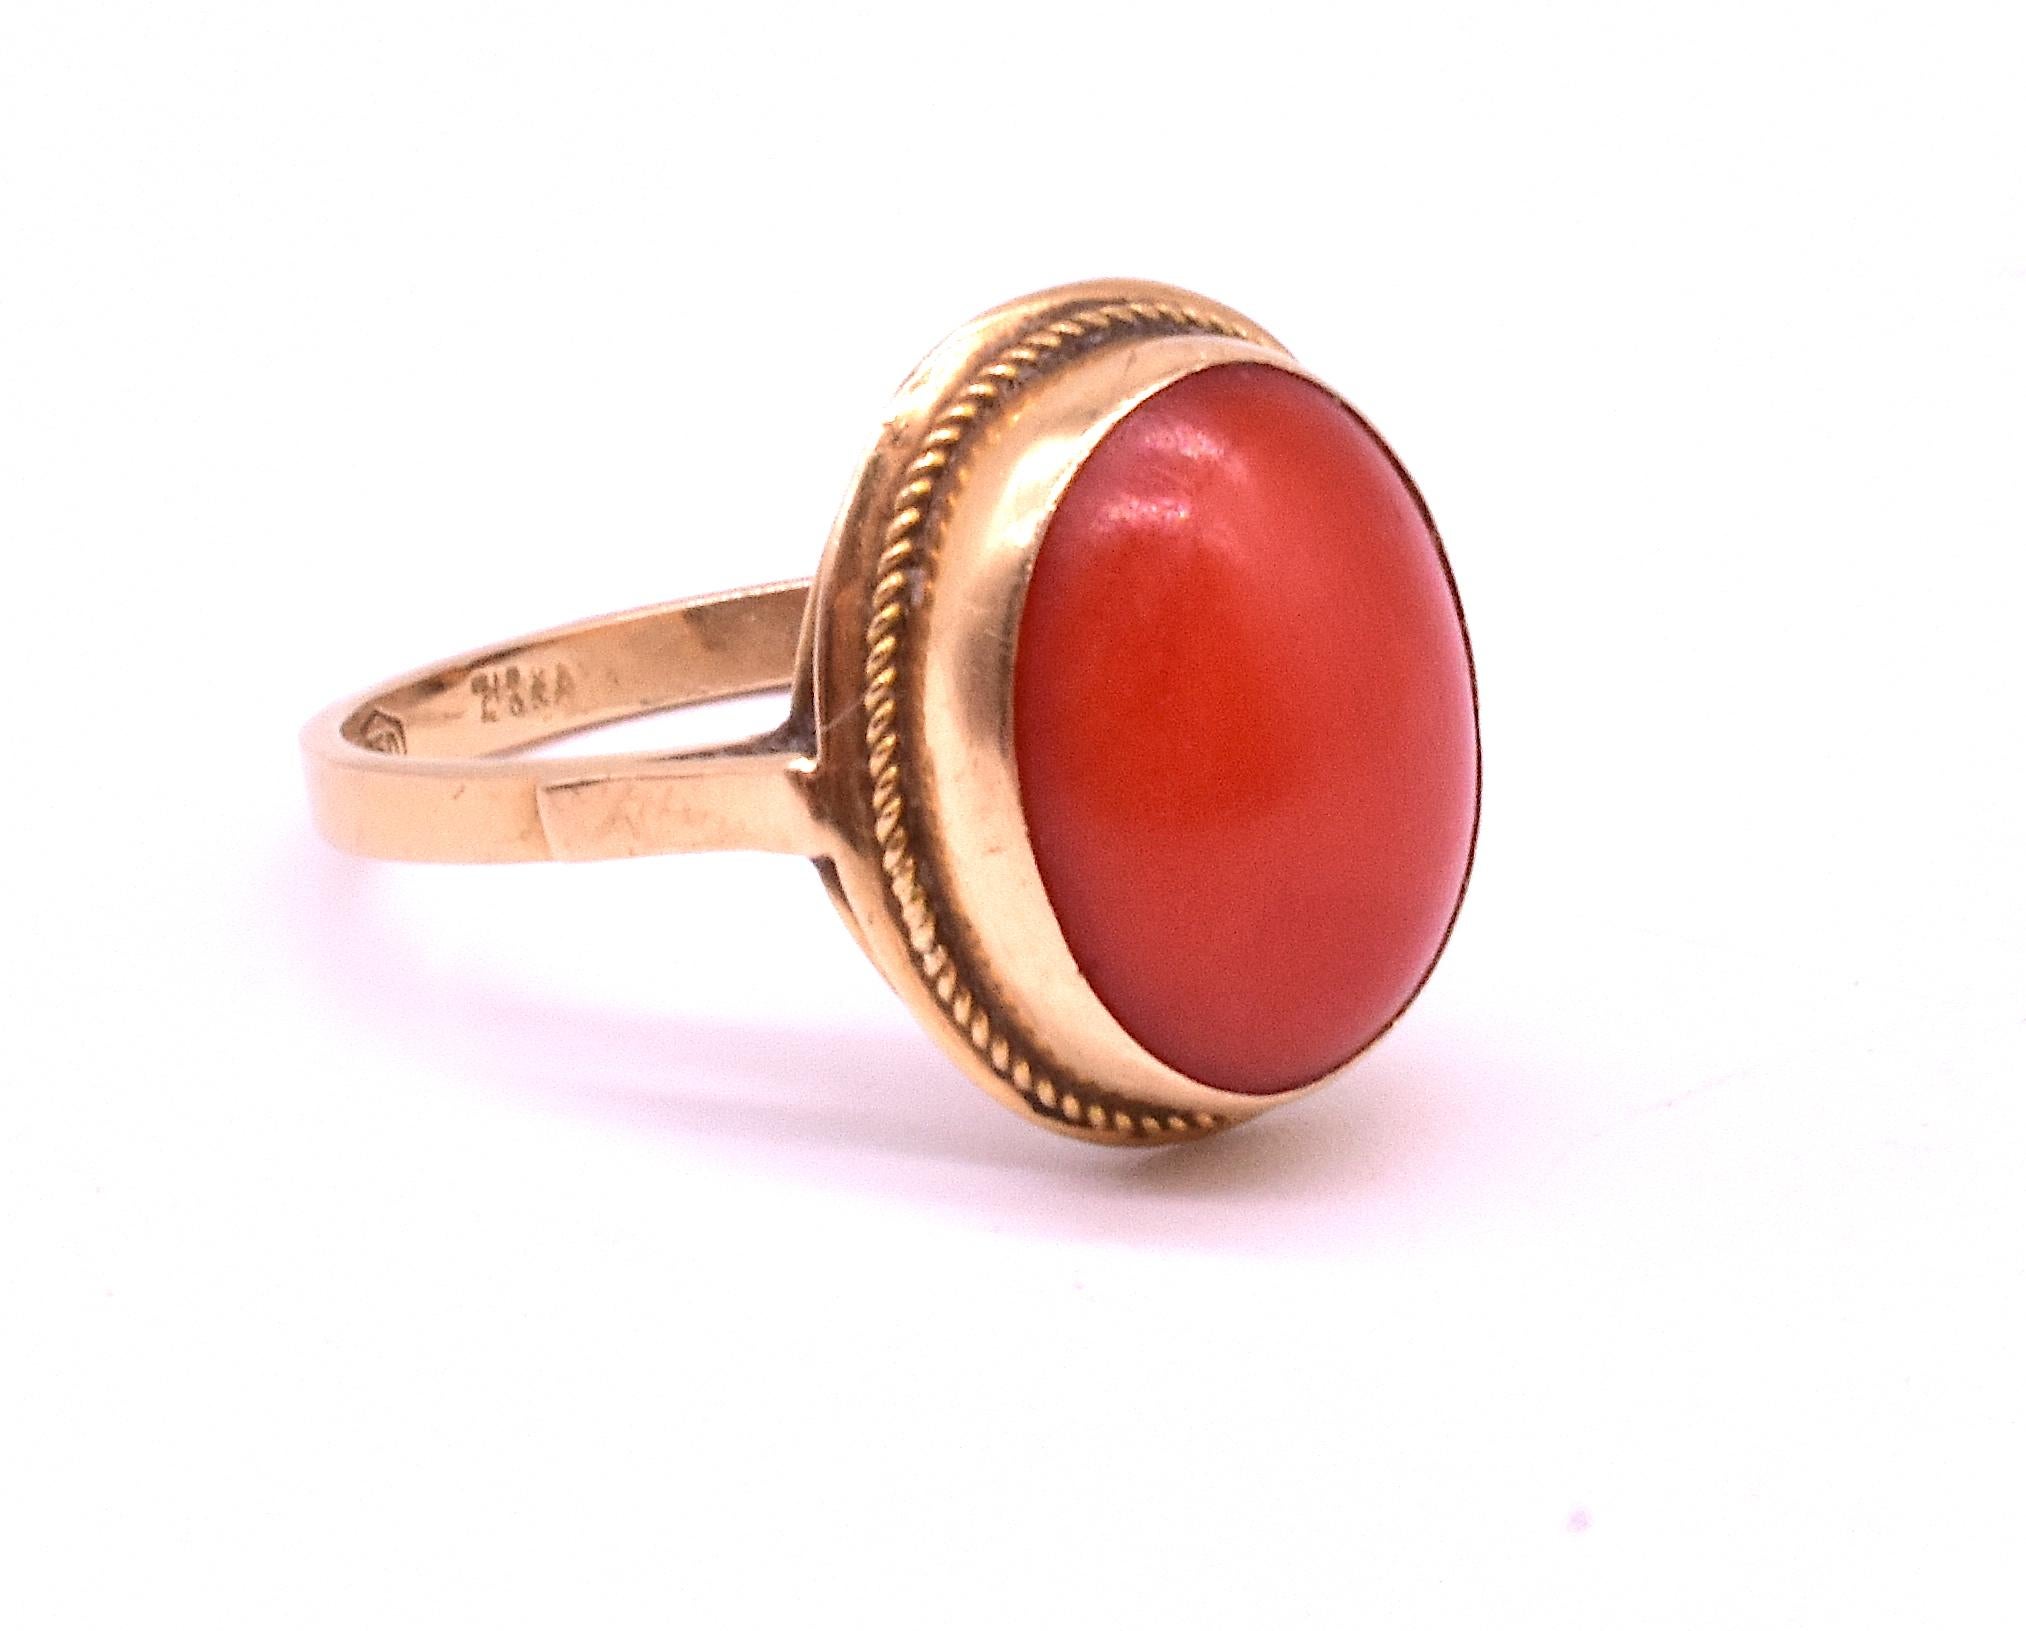 Antique 18K yellow gold ring with a 5/8 inch diameter round, beautifully colored smooth cabochon coral at the center and millegrain detail in the gold border. 
A classic, simple pretty Victorian coral ring from the 1880's. The ring is a size 7.